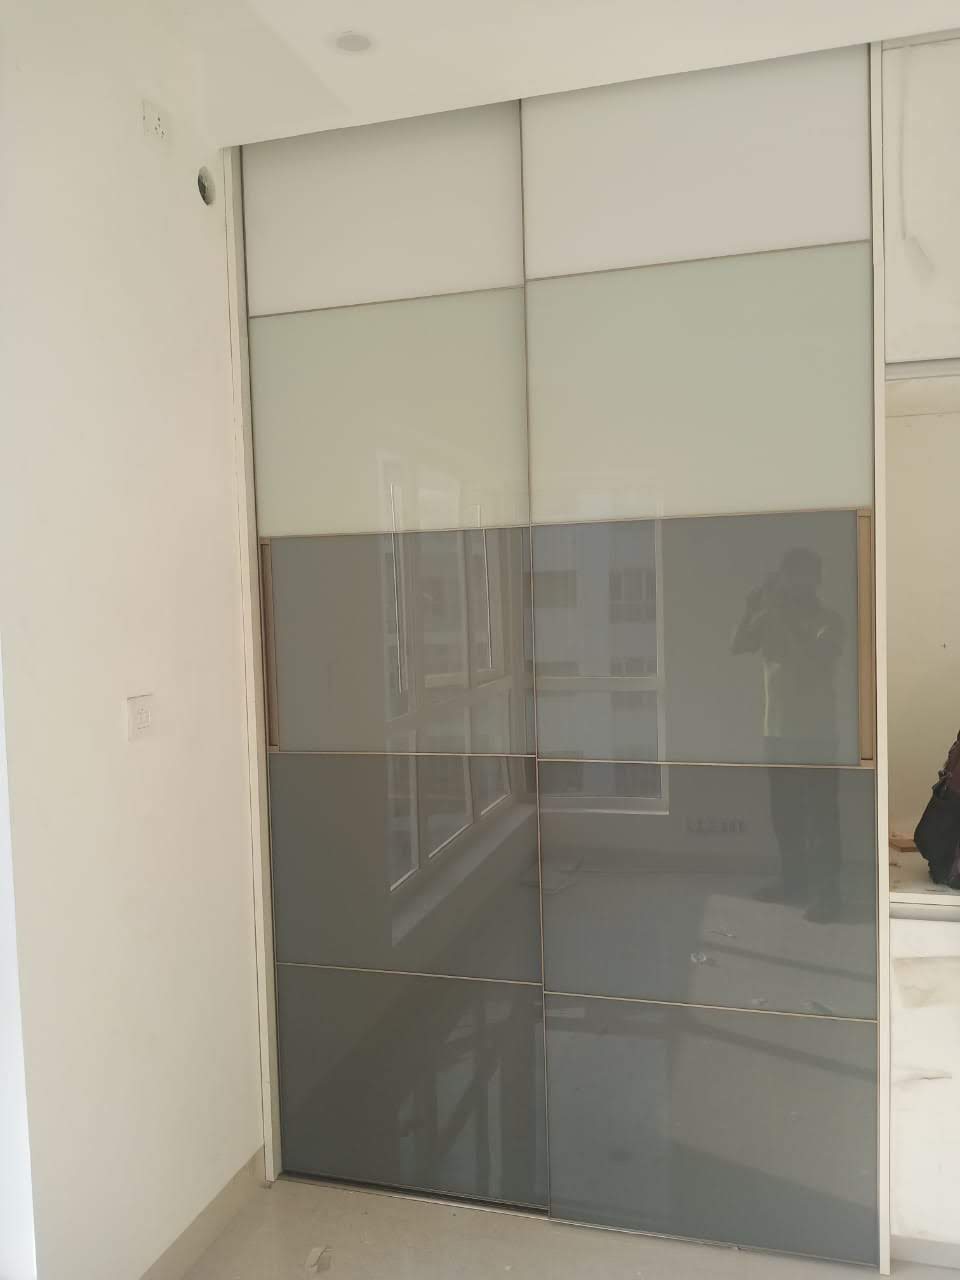 cheapest-low-price-lacquer-glass-wardrobe-designs-in-gurgaon-gurugram-best-lacquer-glass-dealers-manufacturers-in-gurgaon-india